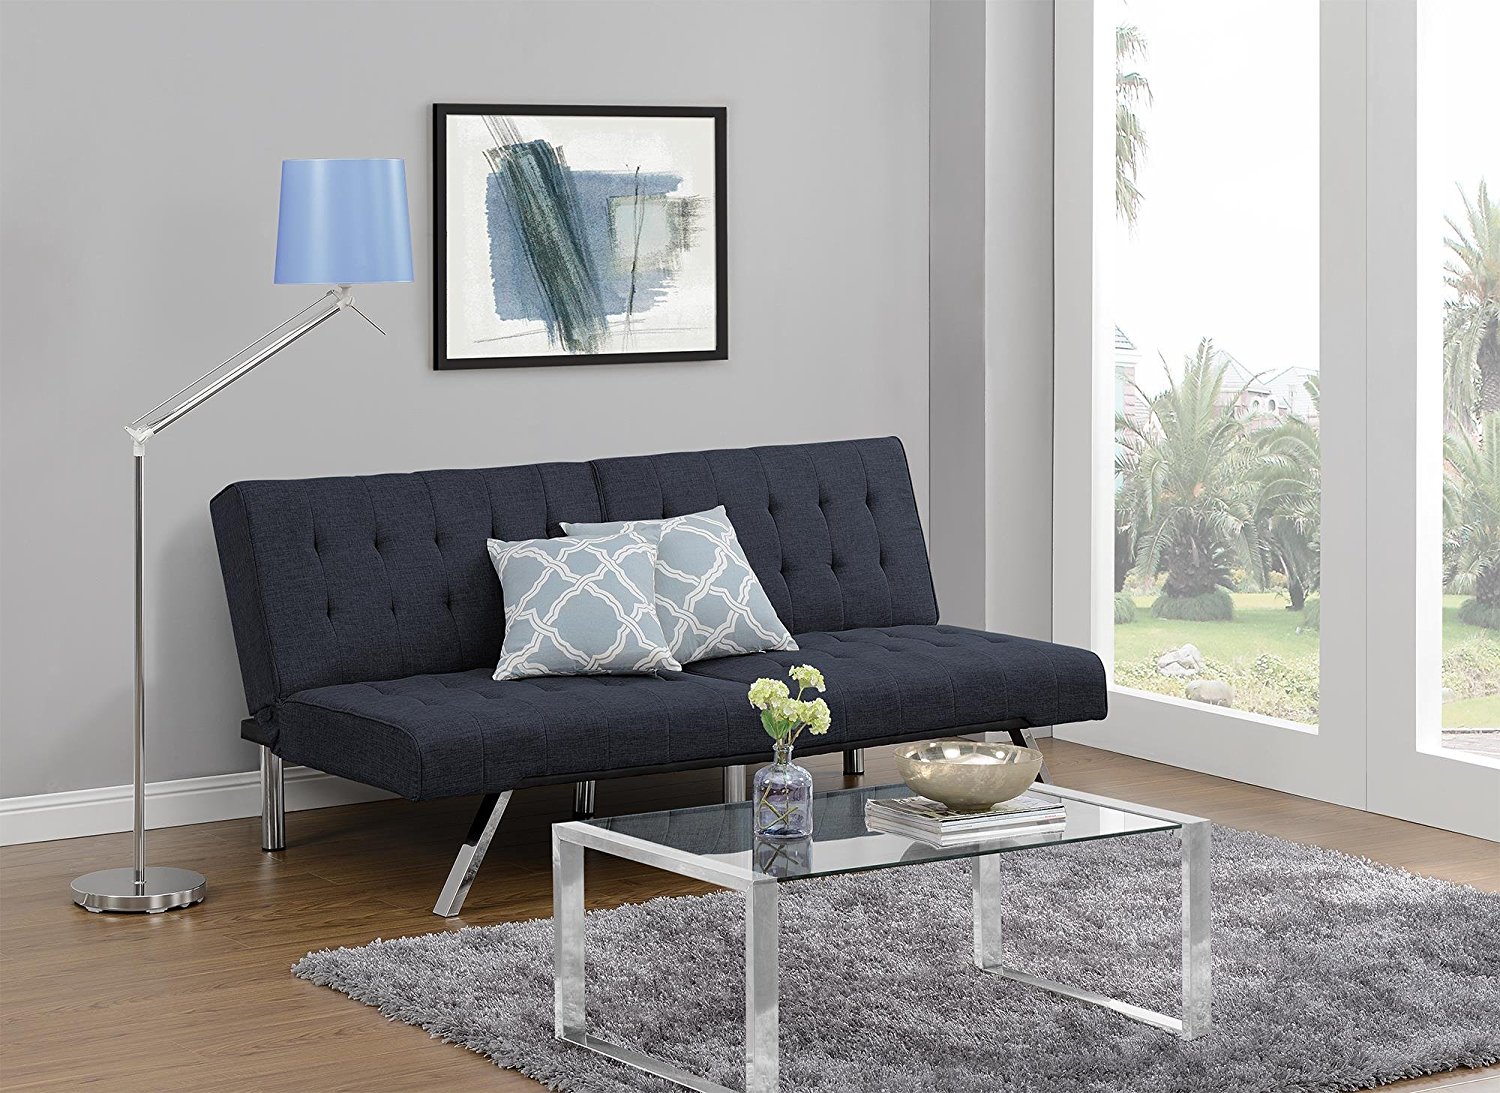 DHP Emily Futon Couch Bed, Modern Sofa Design Includes Sturdy Chrome Legs and Rich Linen Upholstery, Navy